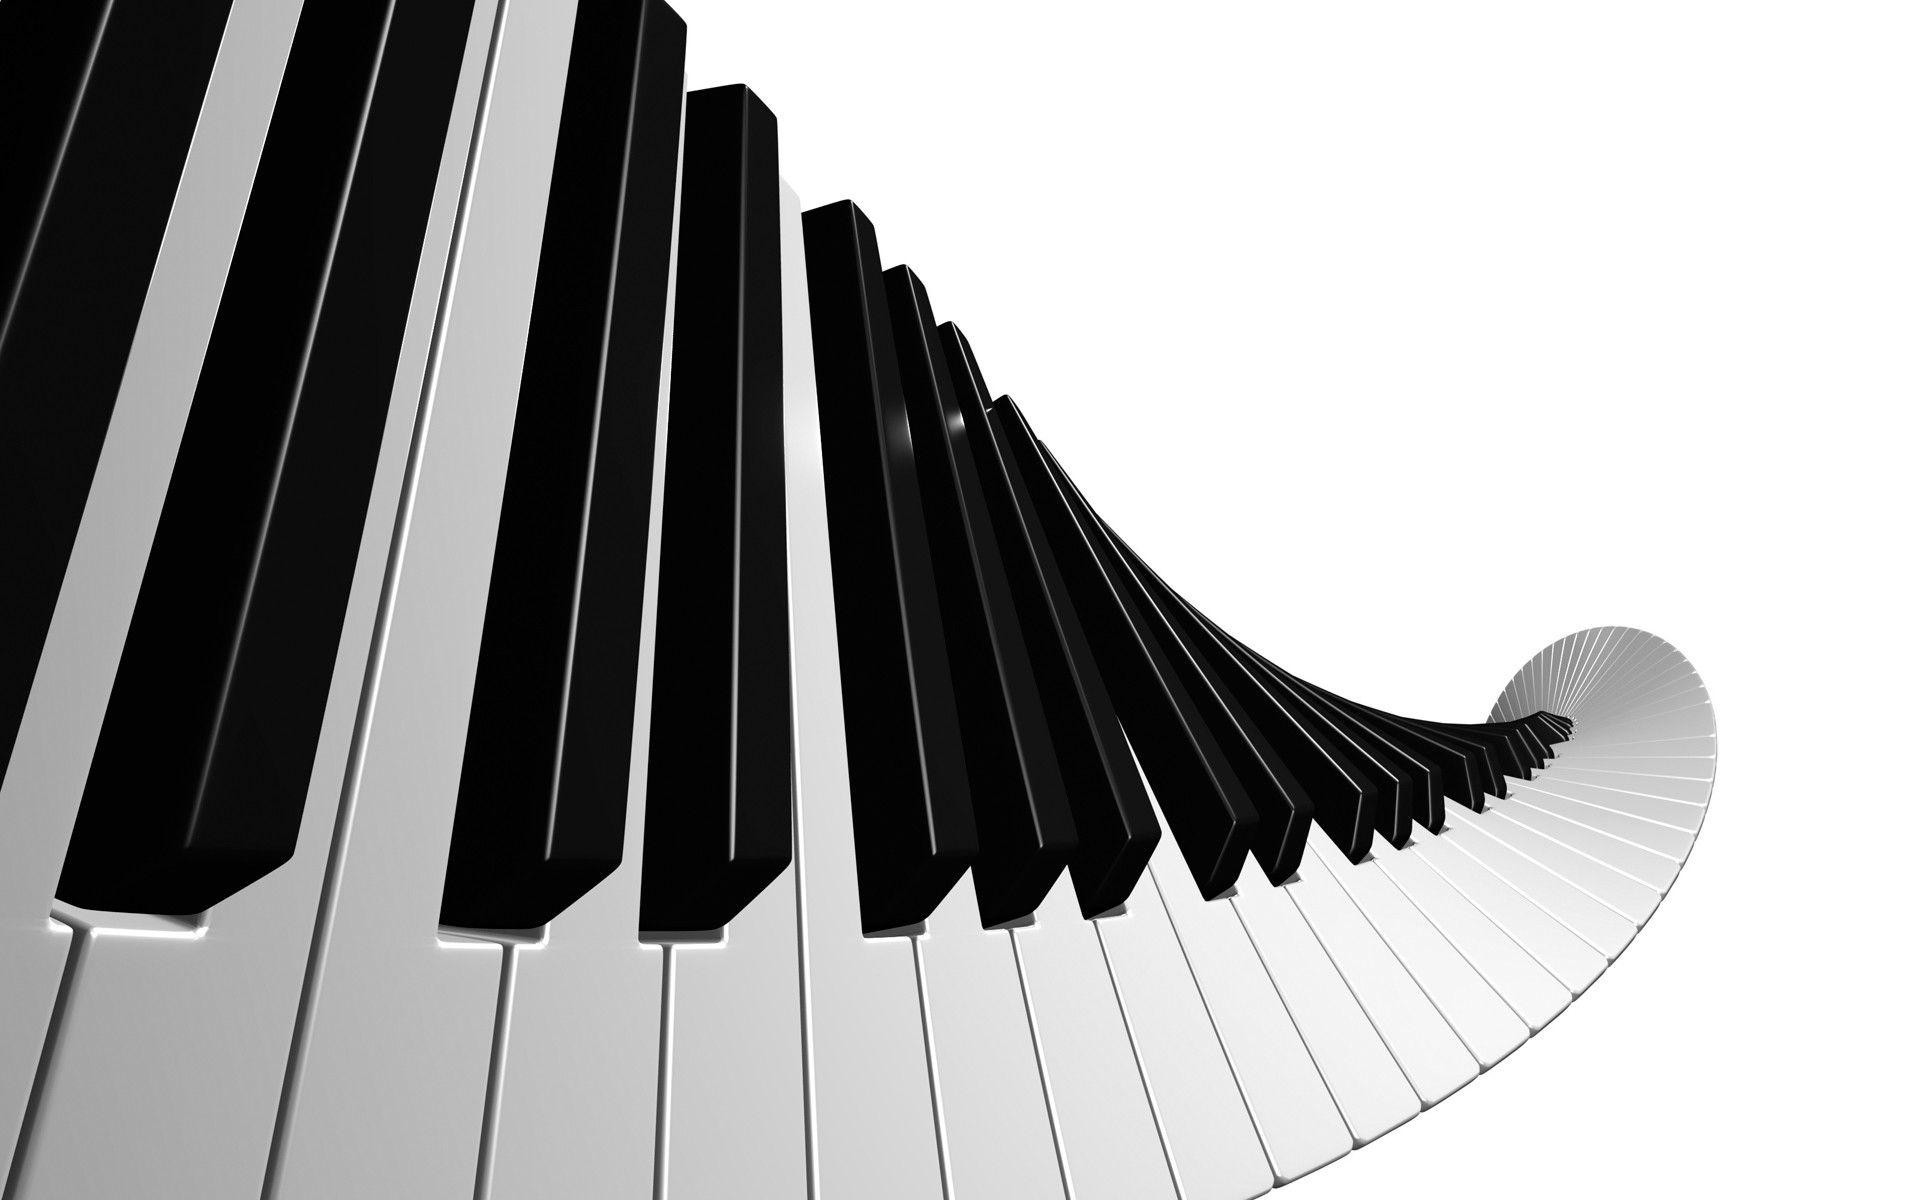 1920x1200 Music Wallpaper Piano 28272 Hd Wallpapers in Music - Telusers.